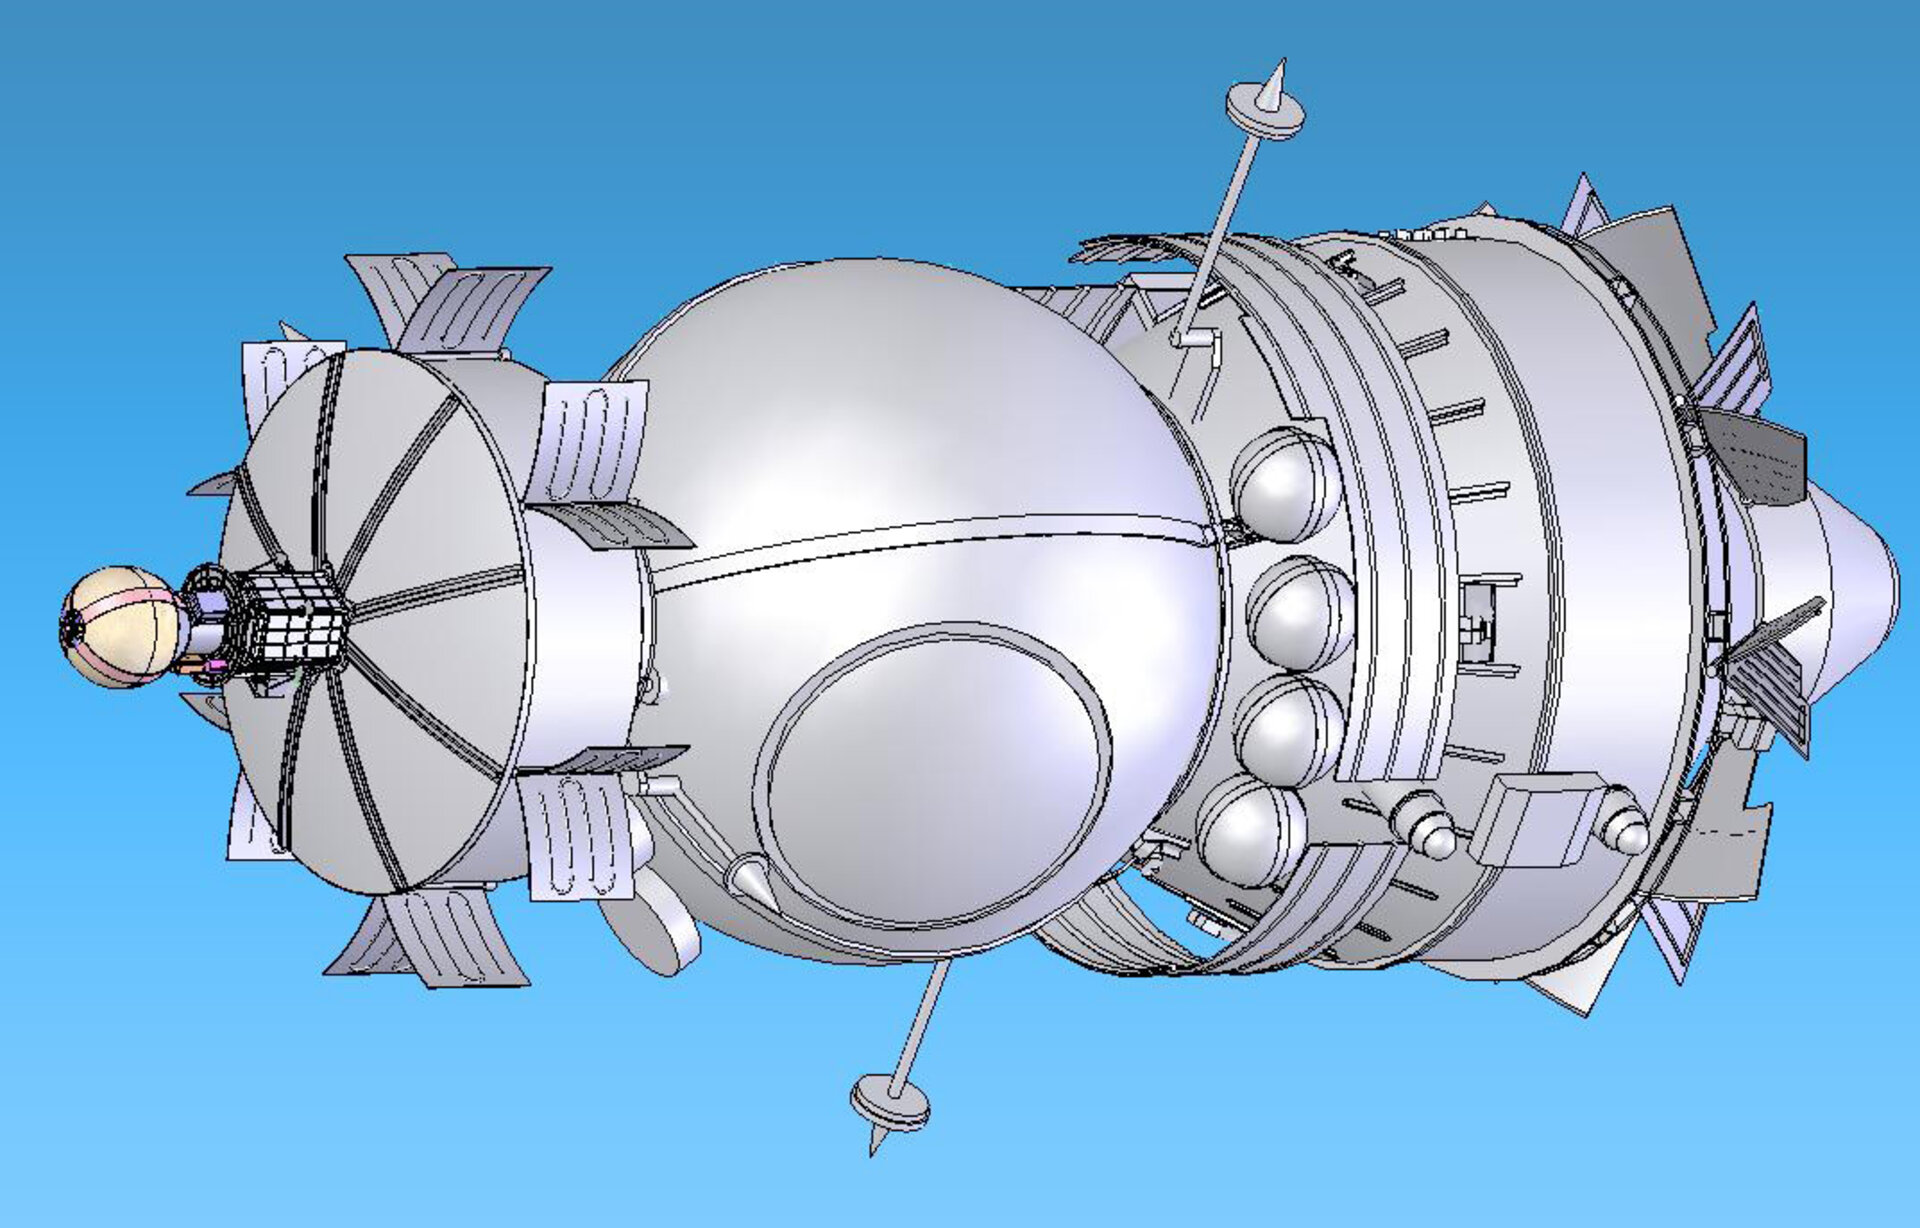 The Foton M3 spacecraft, including the YES2 payload